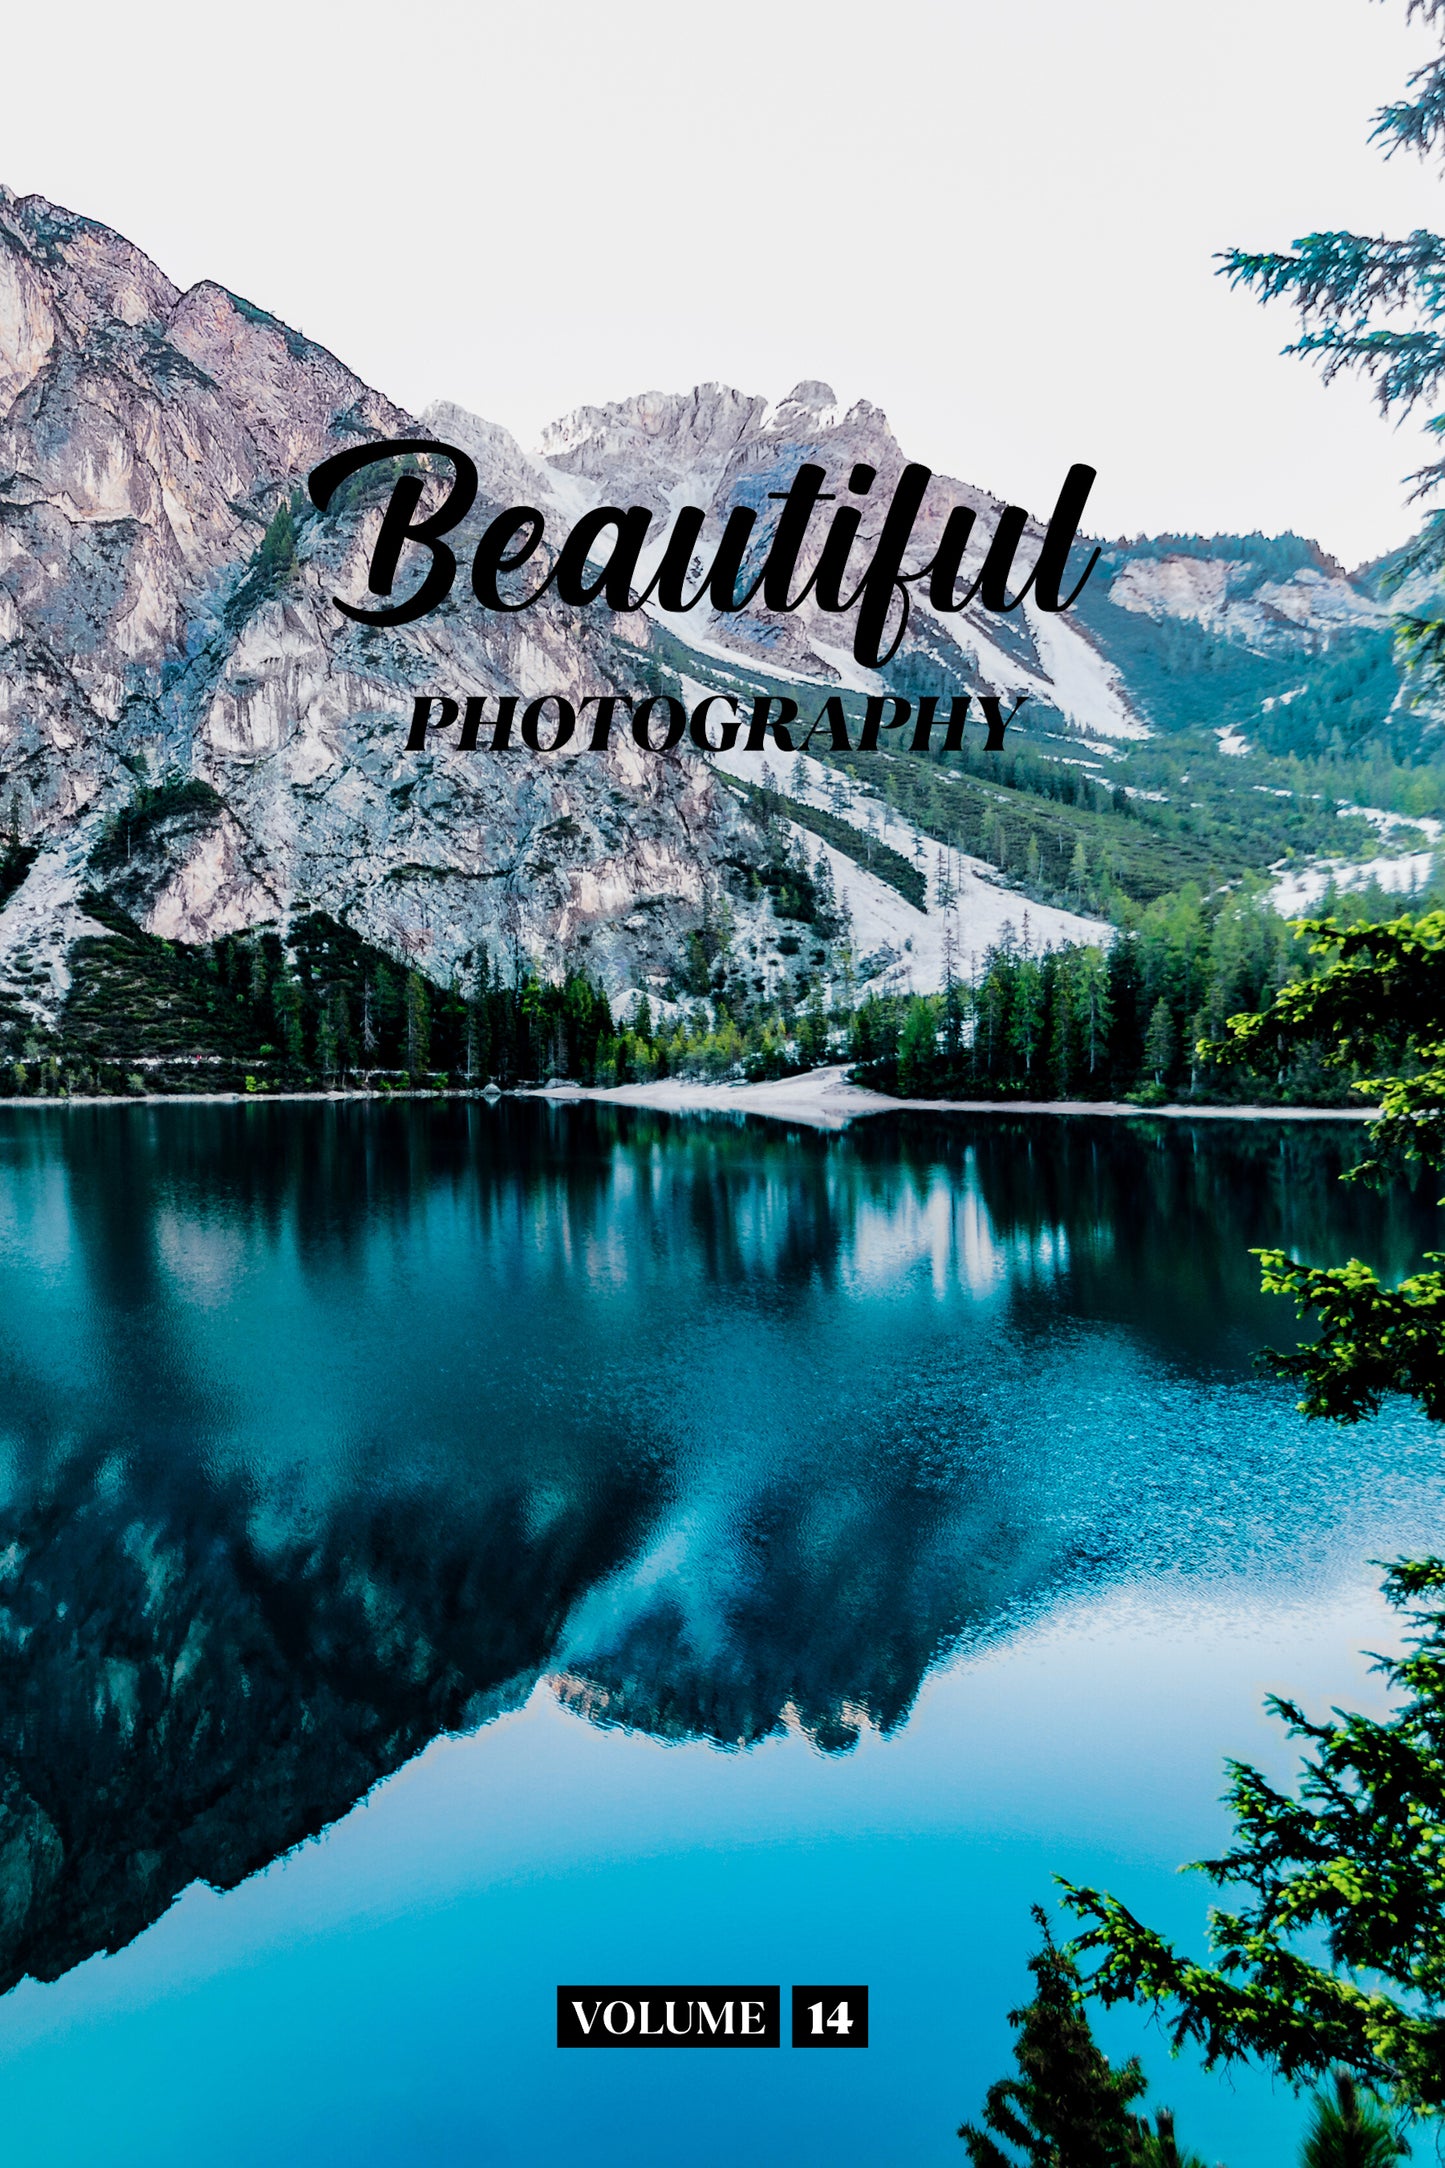 Beautiful Photography Volume 14 (Physical Book)